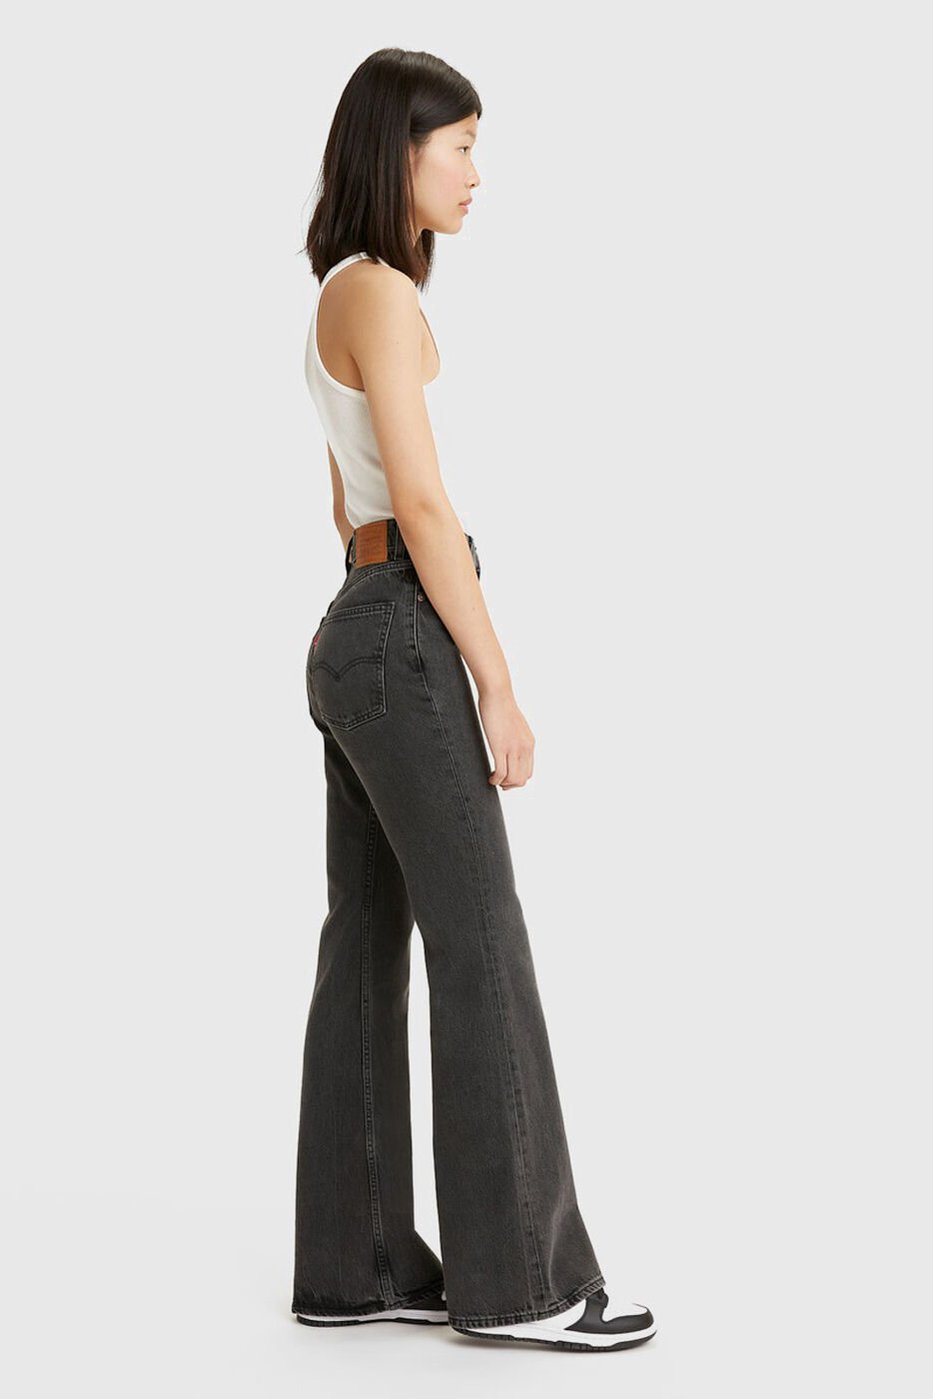 Levi's 70s High Flare Jeans - Light Wash Jeans - High Rise Jeans